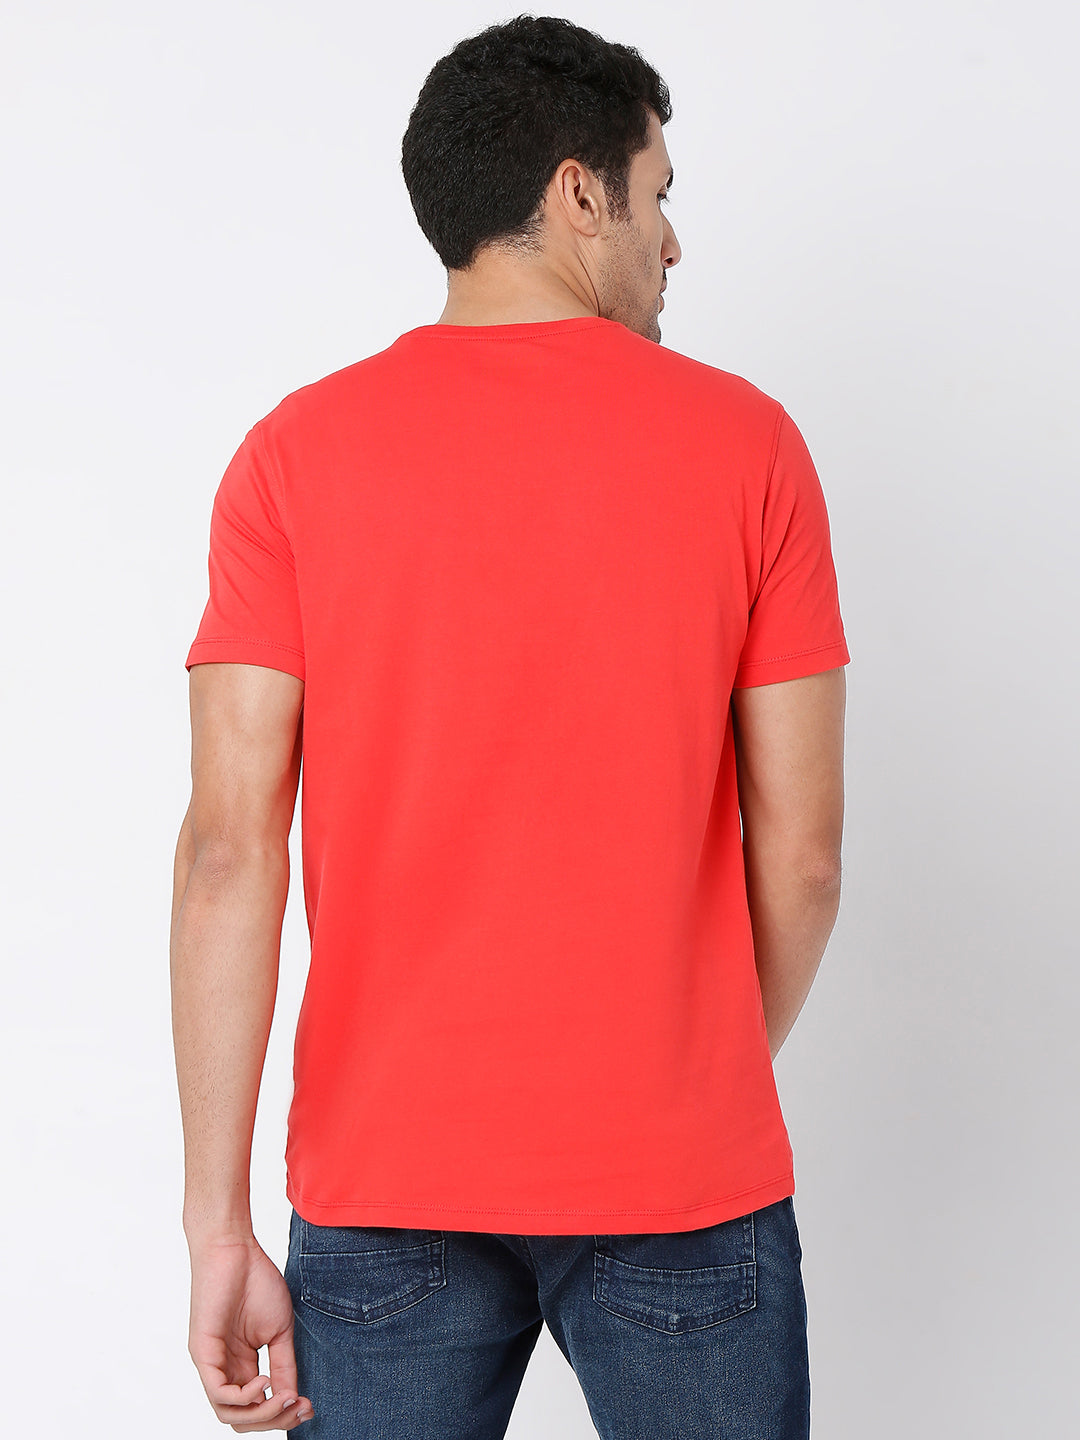 Spykar Coral Cotton Half Sleeve Printed Casual T-Shirt For Men